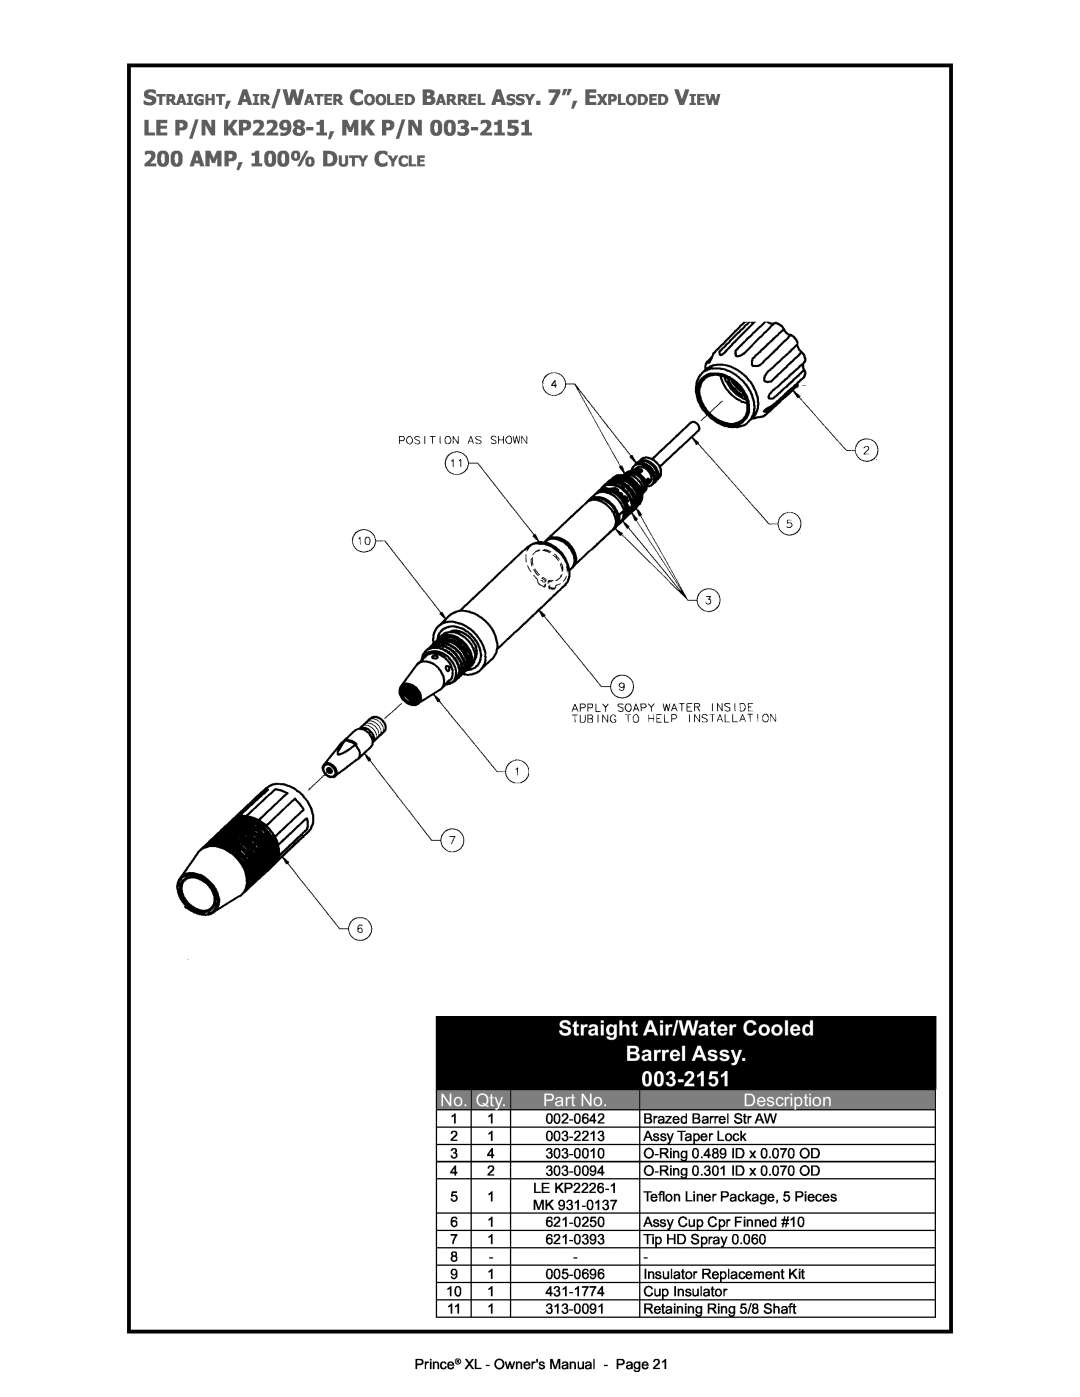 Lincoln Electric IM818 manual Straight Air/Water Cooled, 003-2151, Barrel Assy, Description 